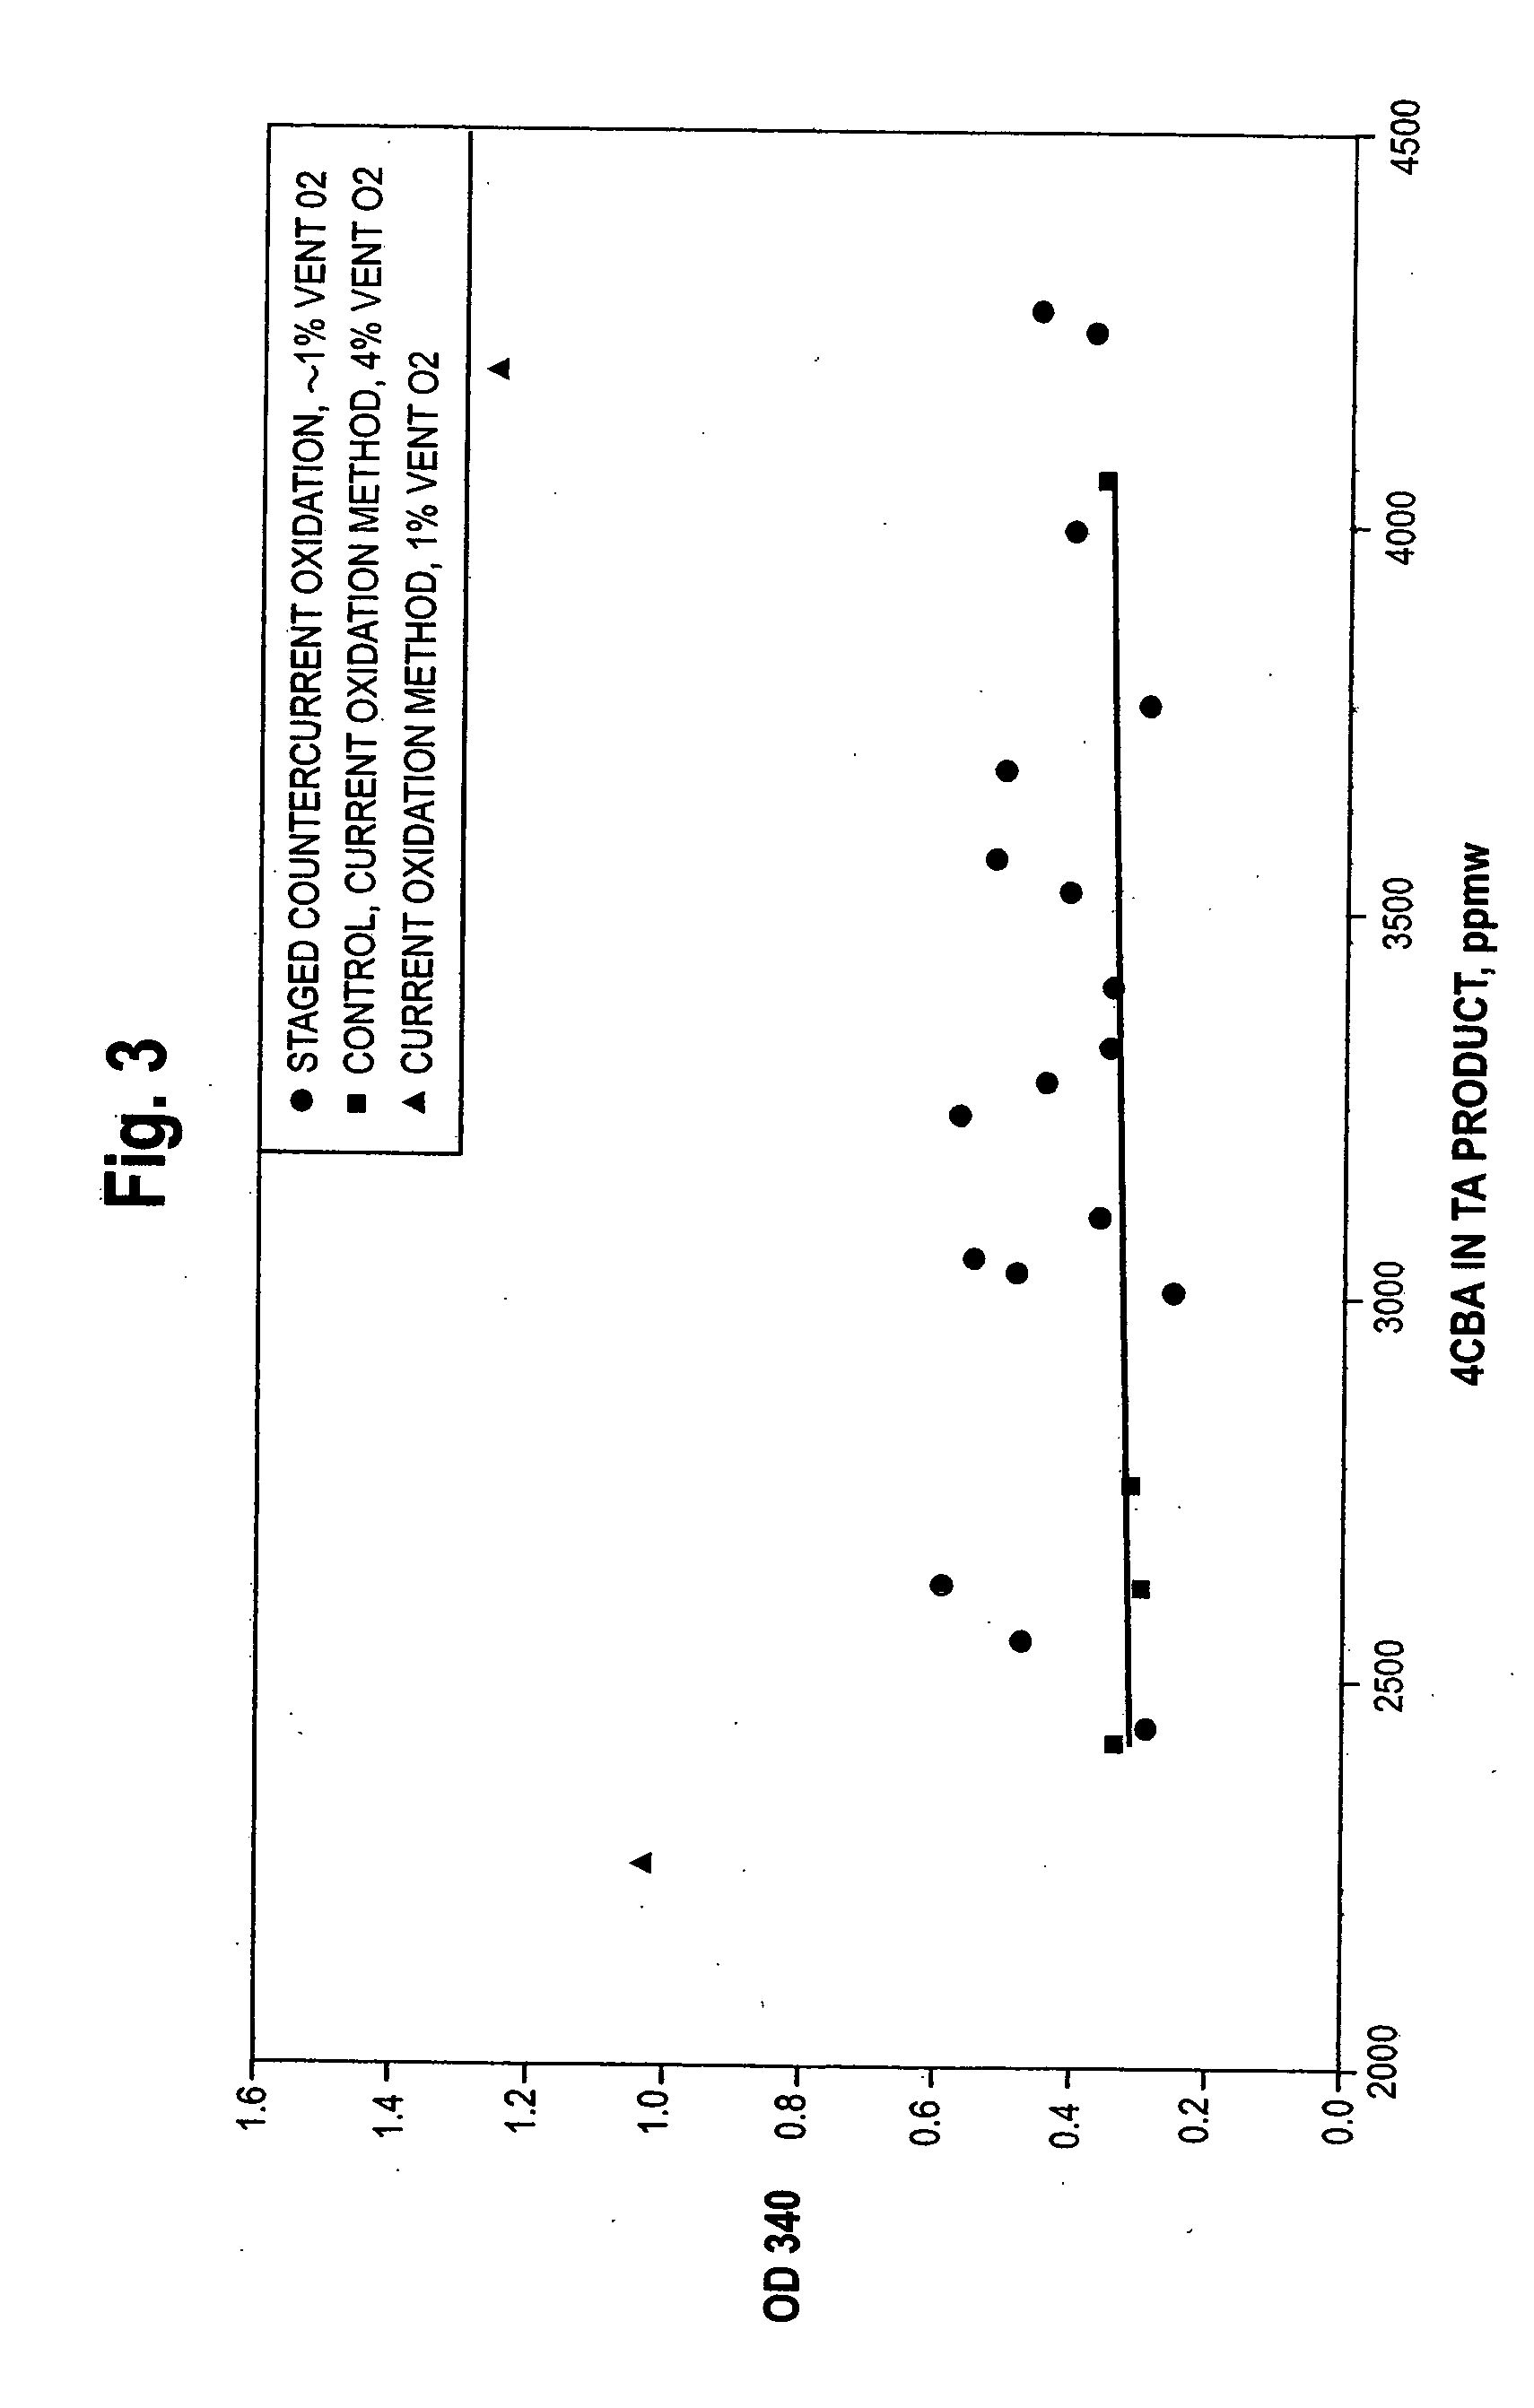 Staged countercurrent oxidation